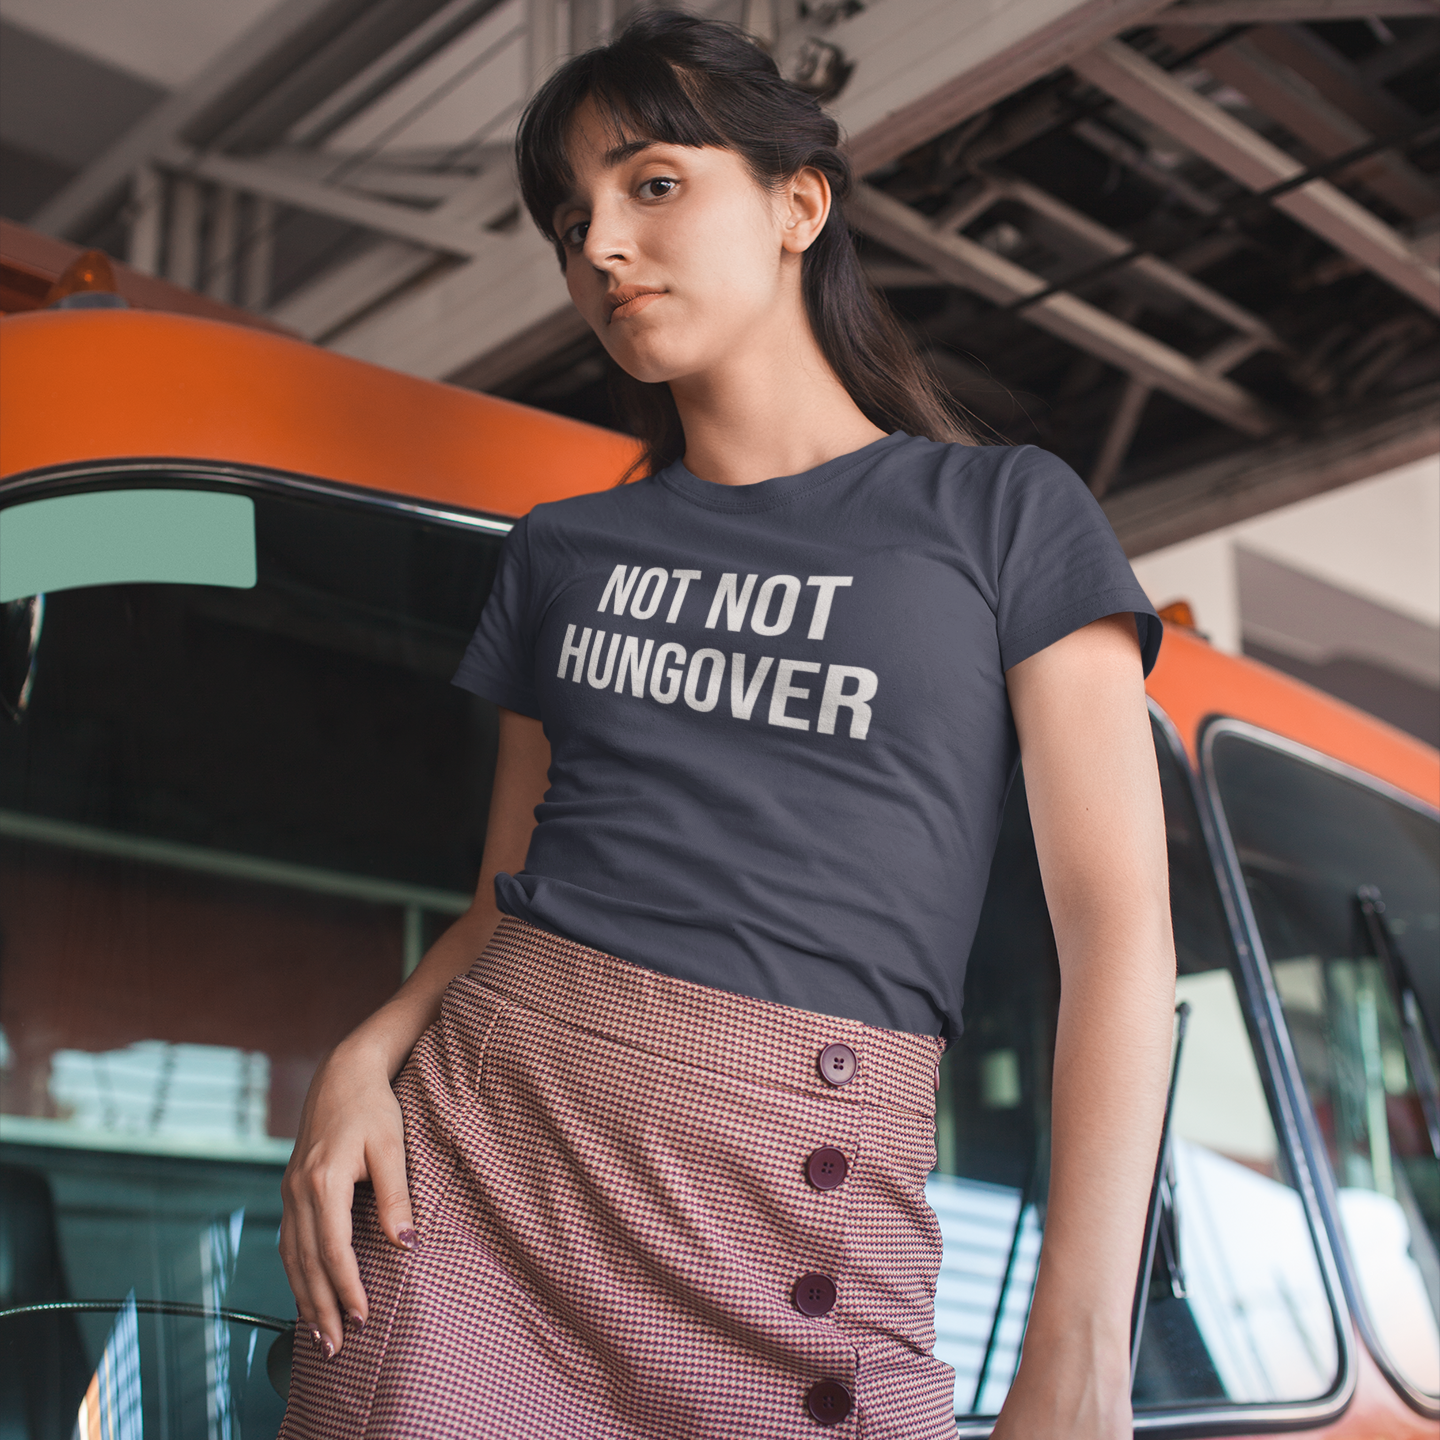 'Not not hungover' adult shirt